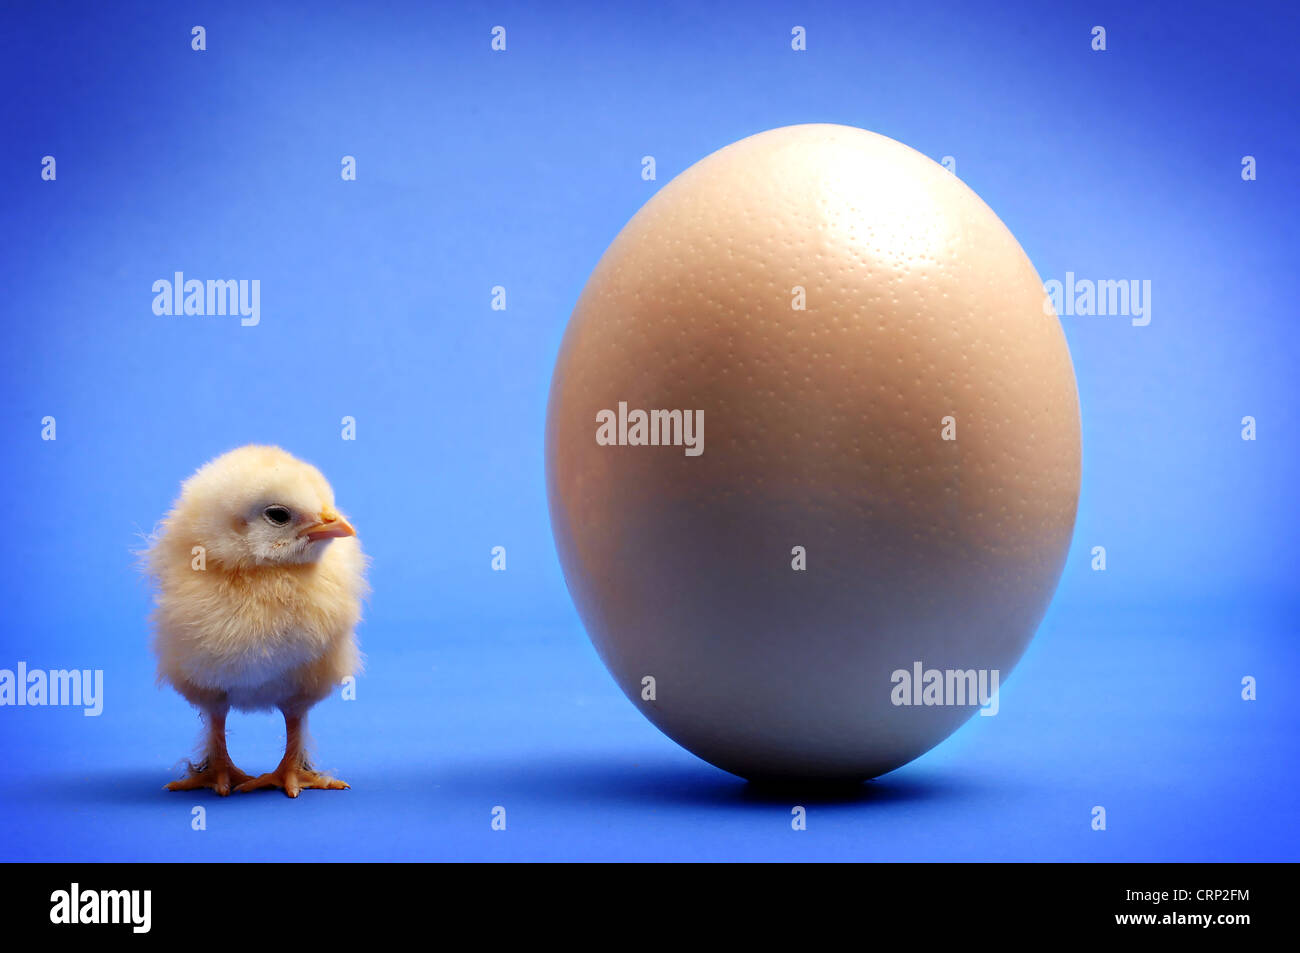 Cut down to size - a tiny yellow chick stands beside a large ostrich egg. Stock Photo